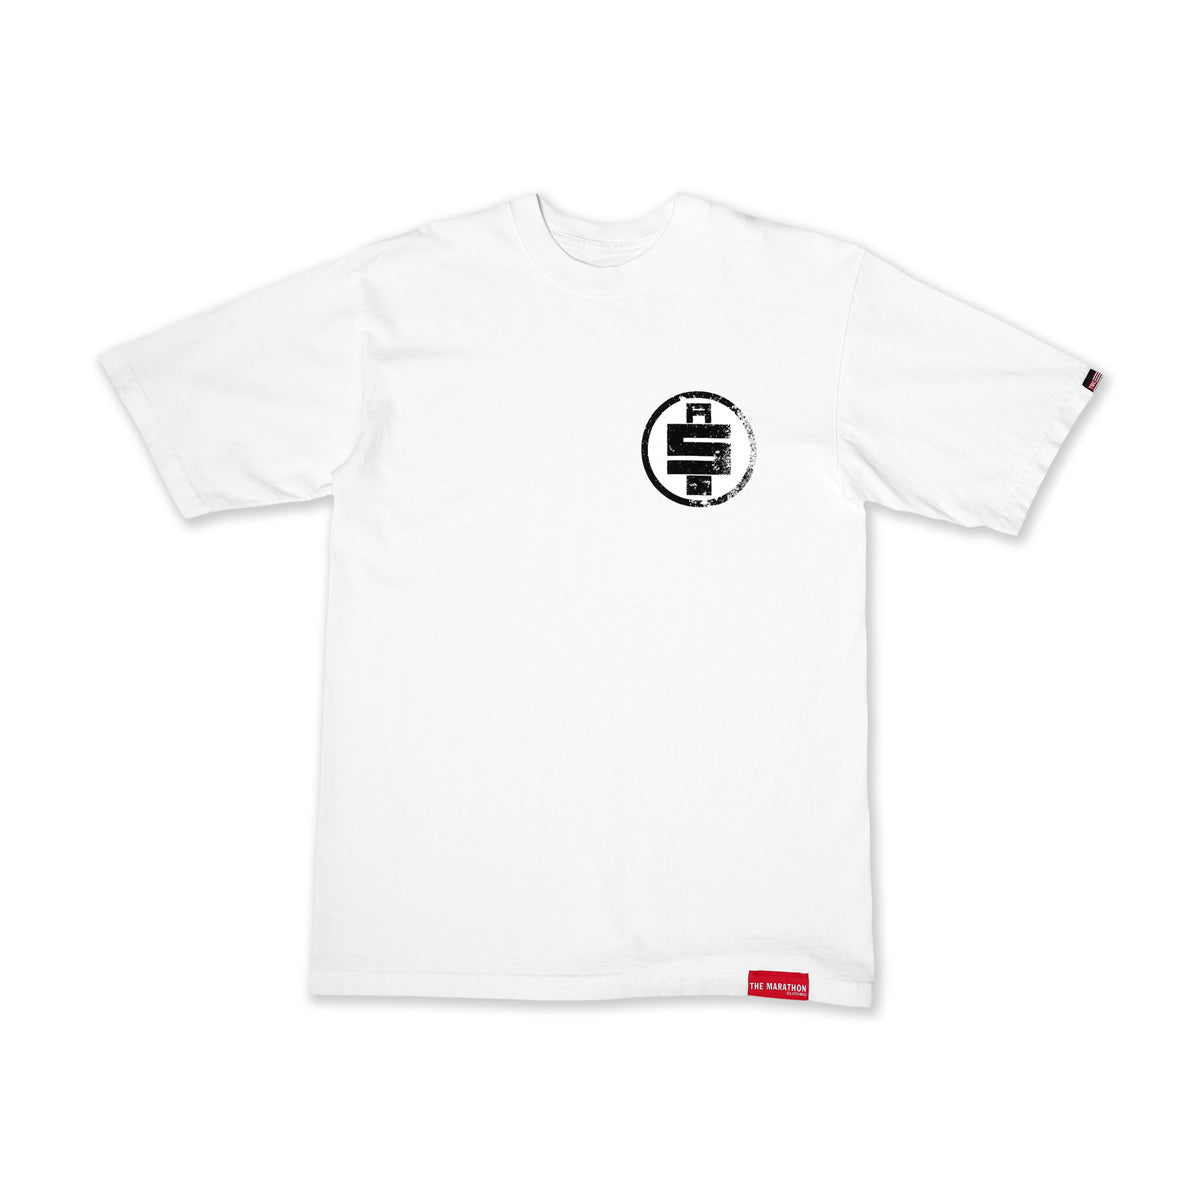 All Money In Vintage T-Shirt - White/Black - Front